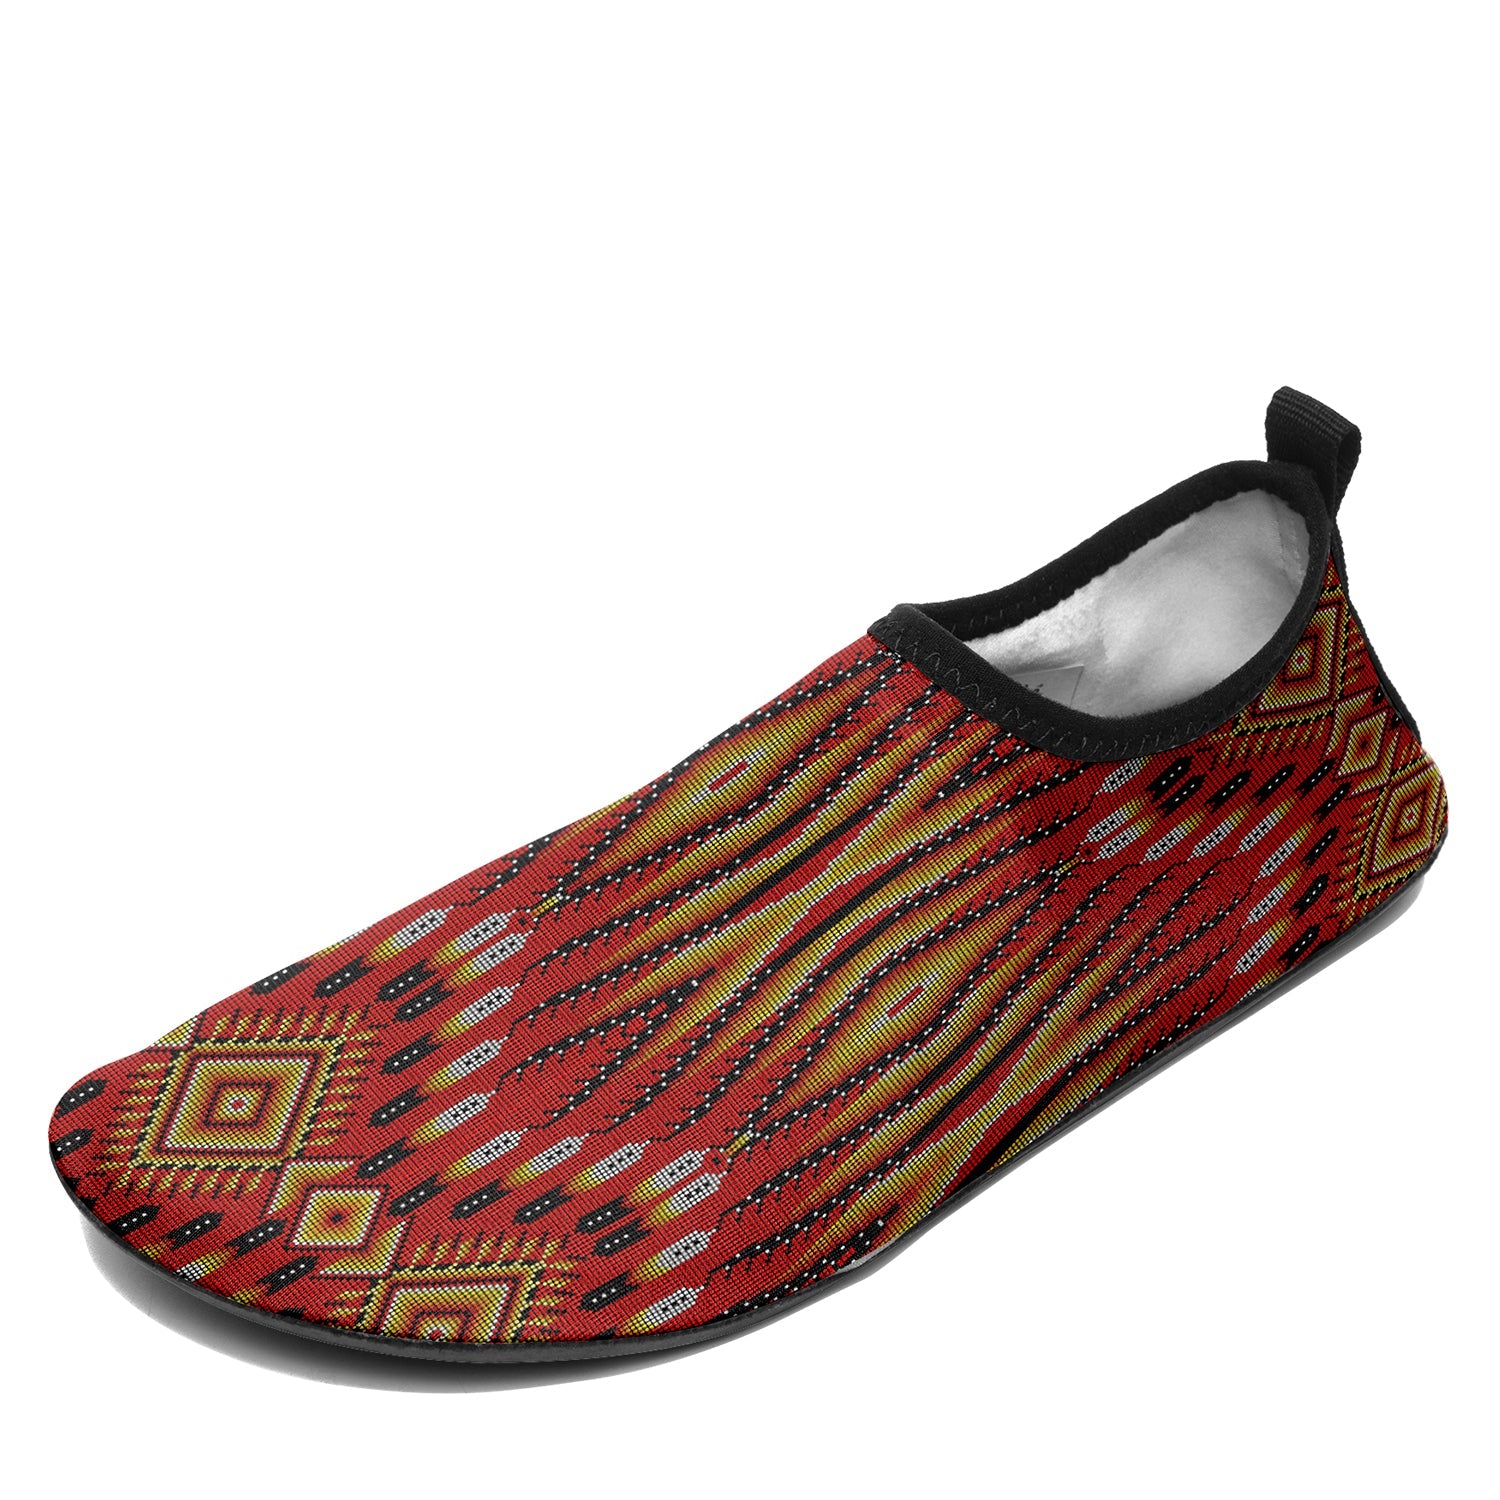 Fire Feather Red Kid's Sockamoccs Slip On Shoes